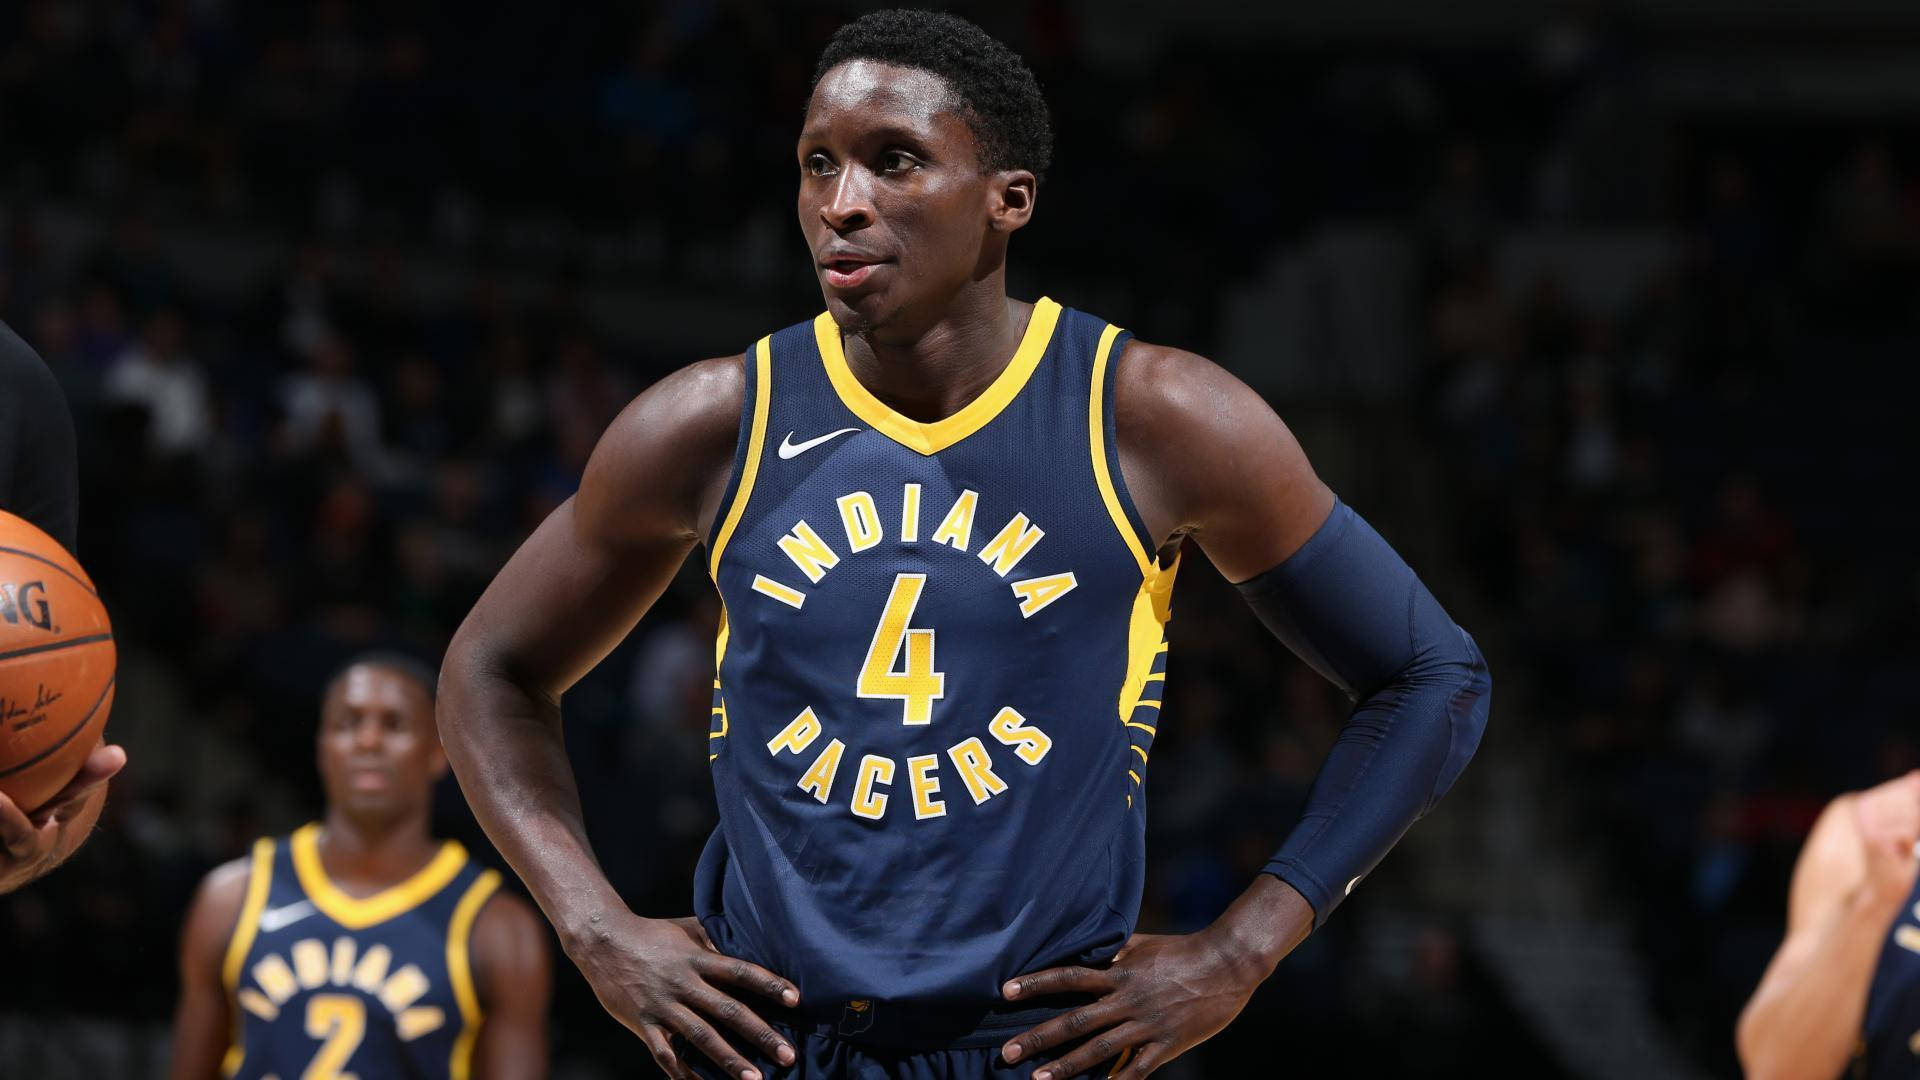 Victor Oladipo In Blue Team Jersey